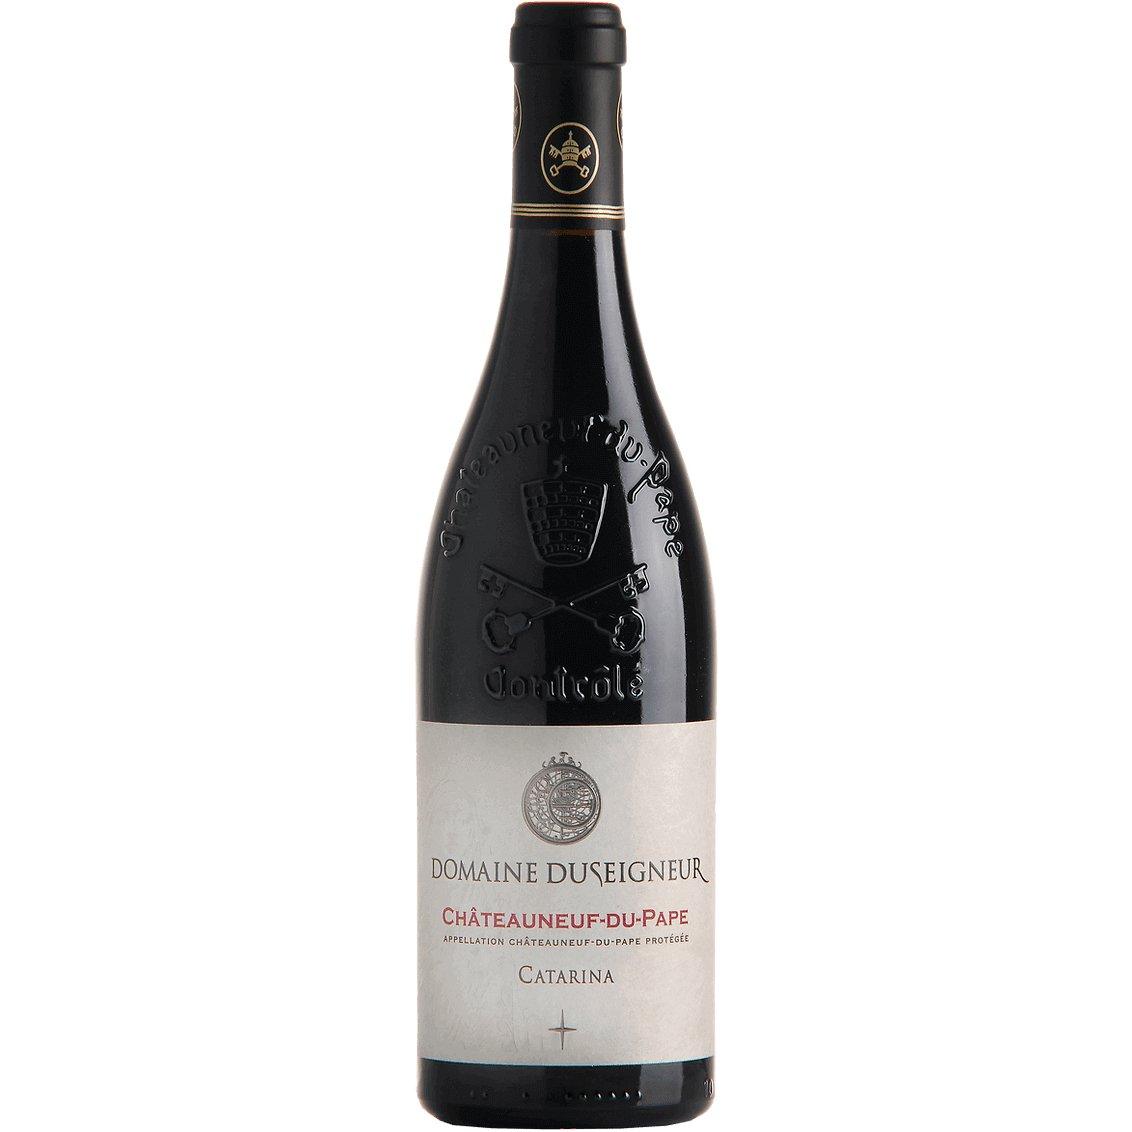 Domaine Duseigneur Catarina Châteauneuf-du-Pape - www.absoluteorganicwine.com